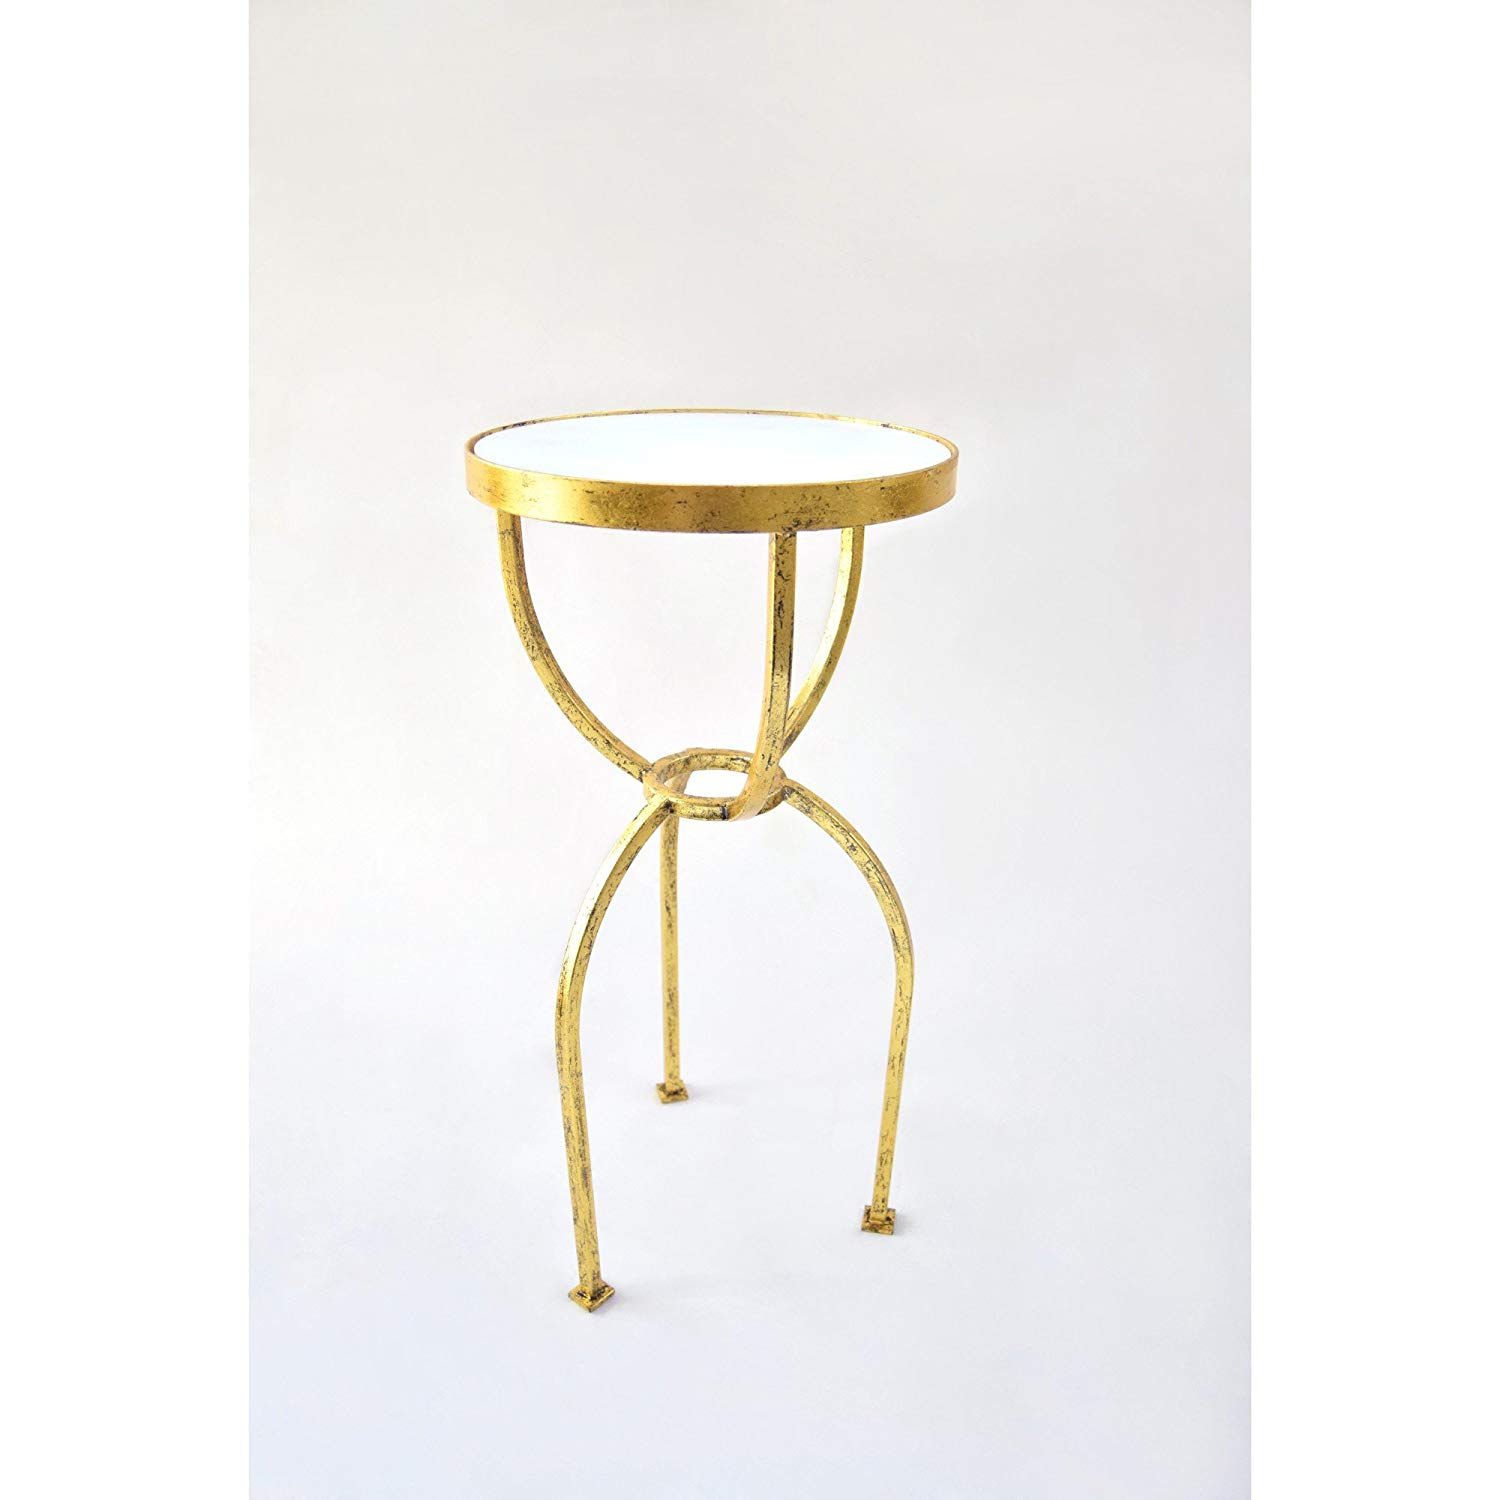 knox and harrison three legged square tube occasional gold leaf accent table with white granite top kitchen dining faux leather chairs small end round ethan allen san diego family